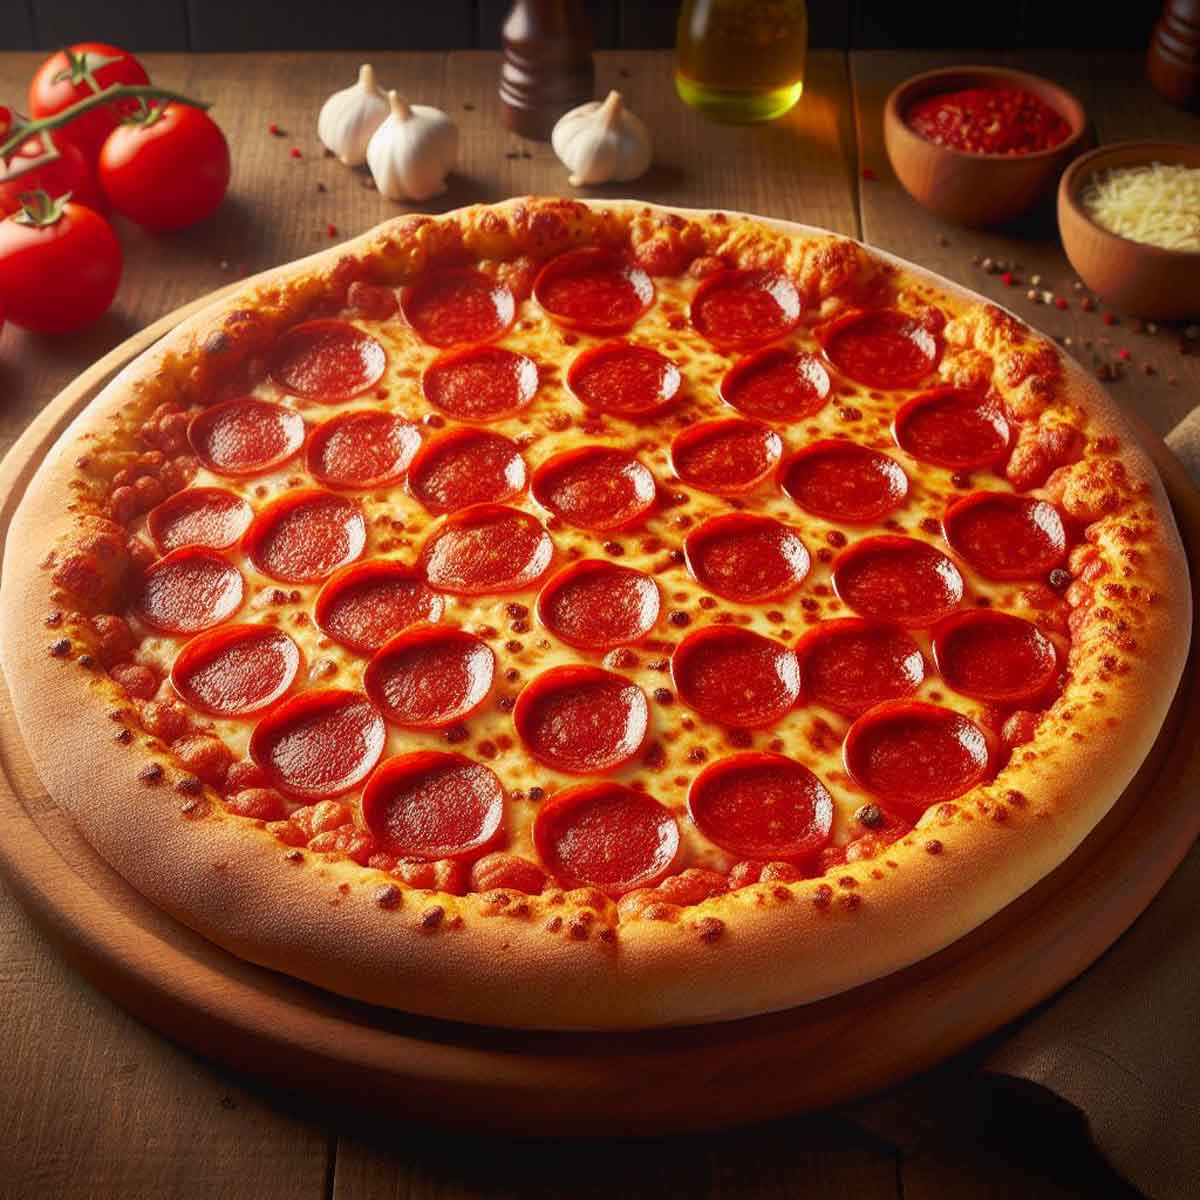 A whole Domino's pepperoni pizza with evenly spaced pepperoni and melted cheese on a wooden board.